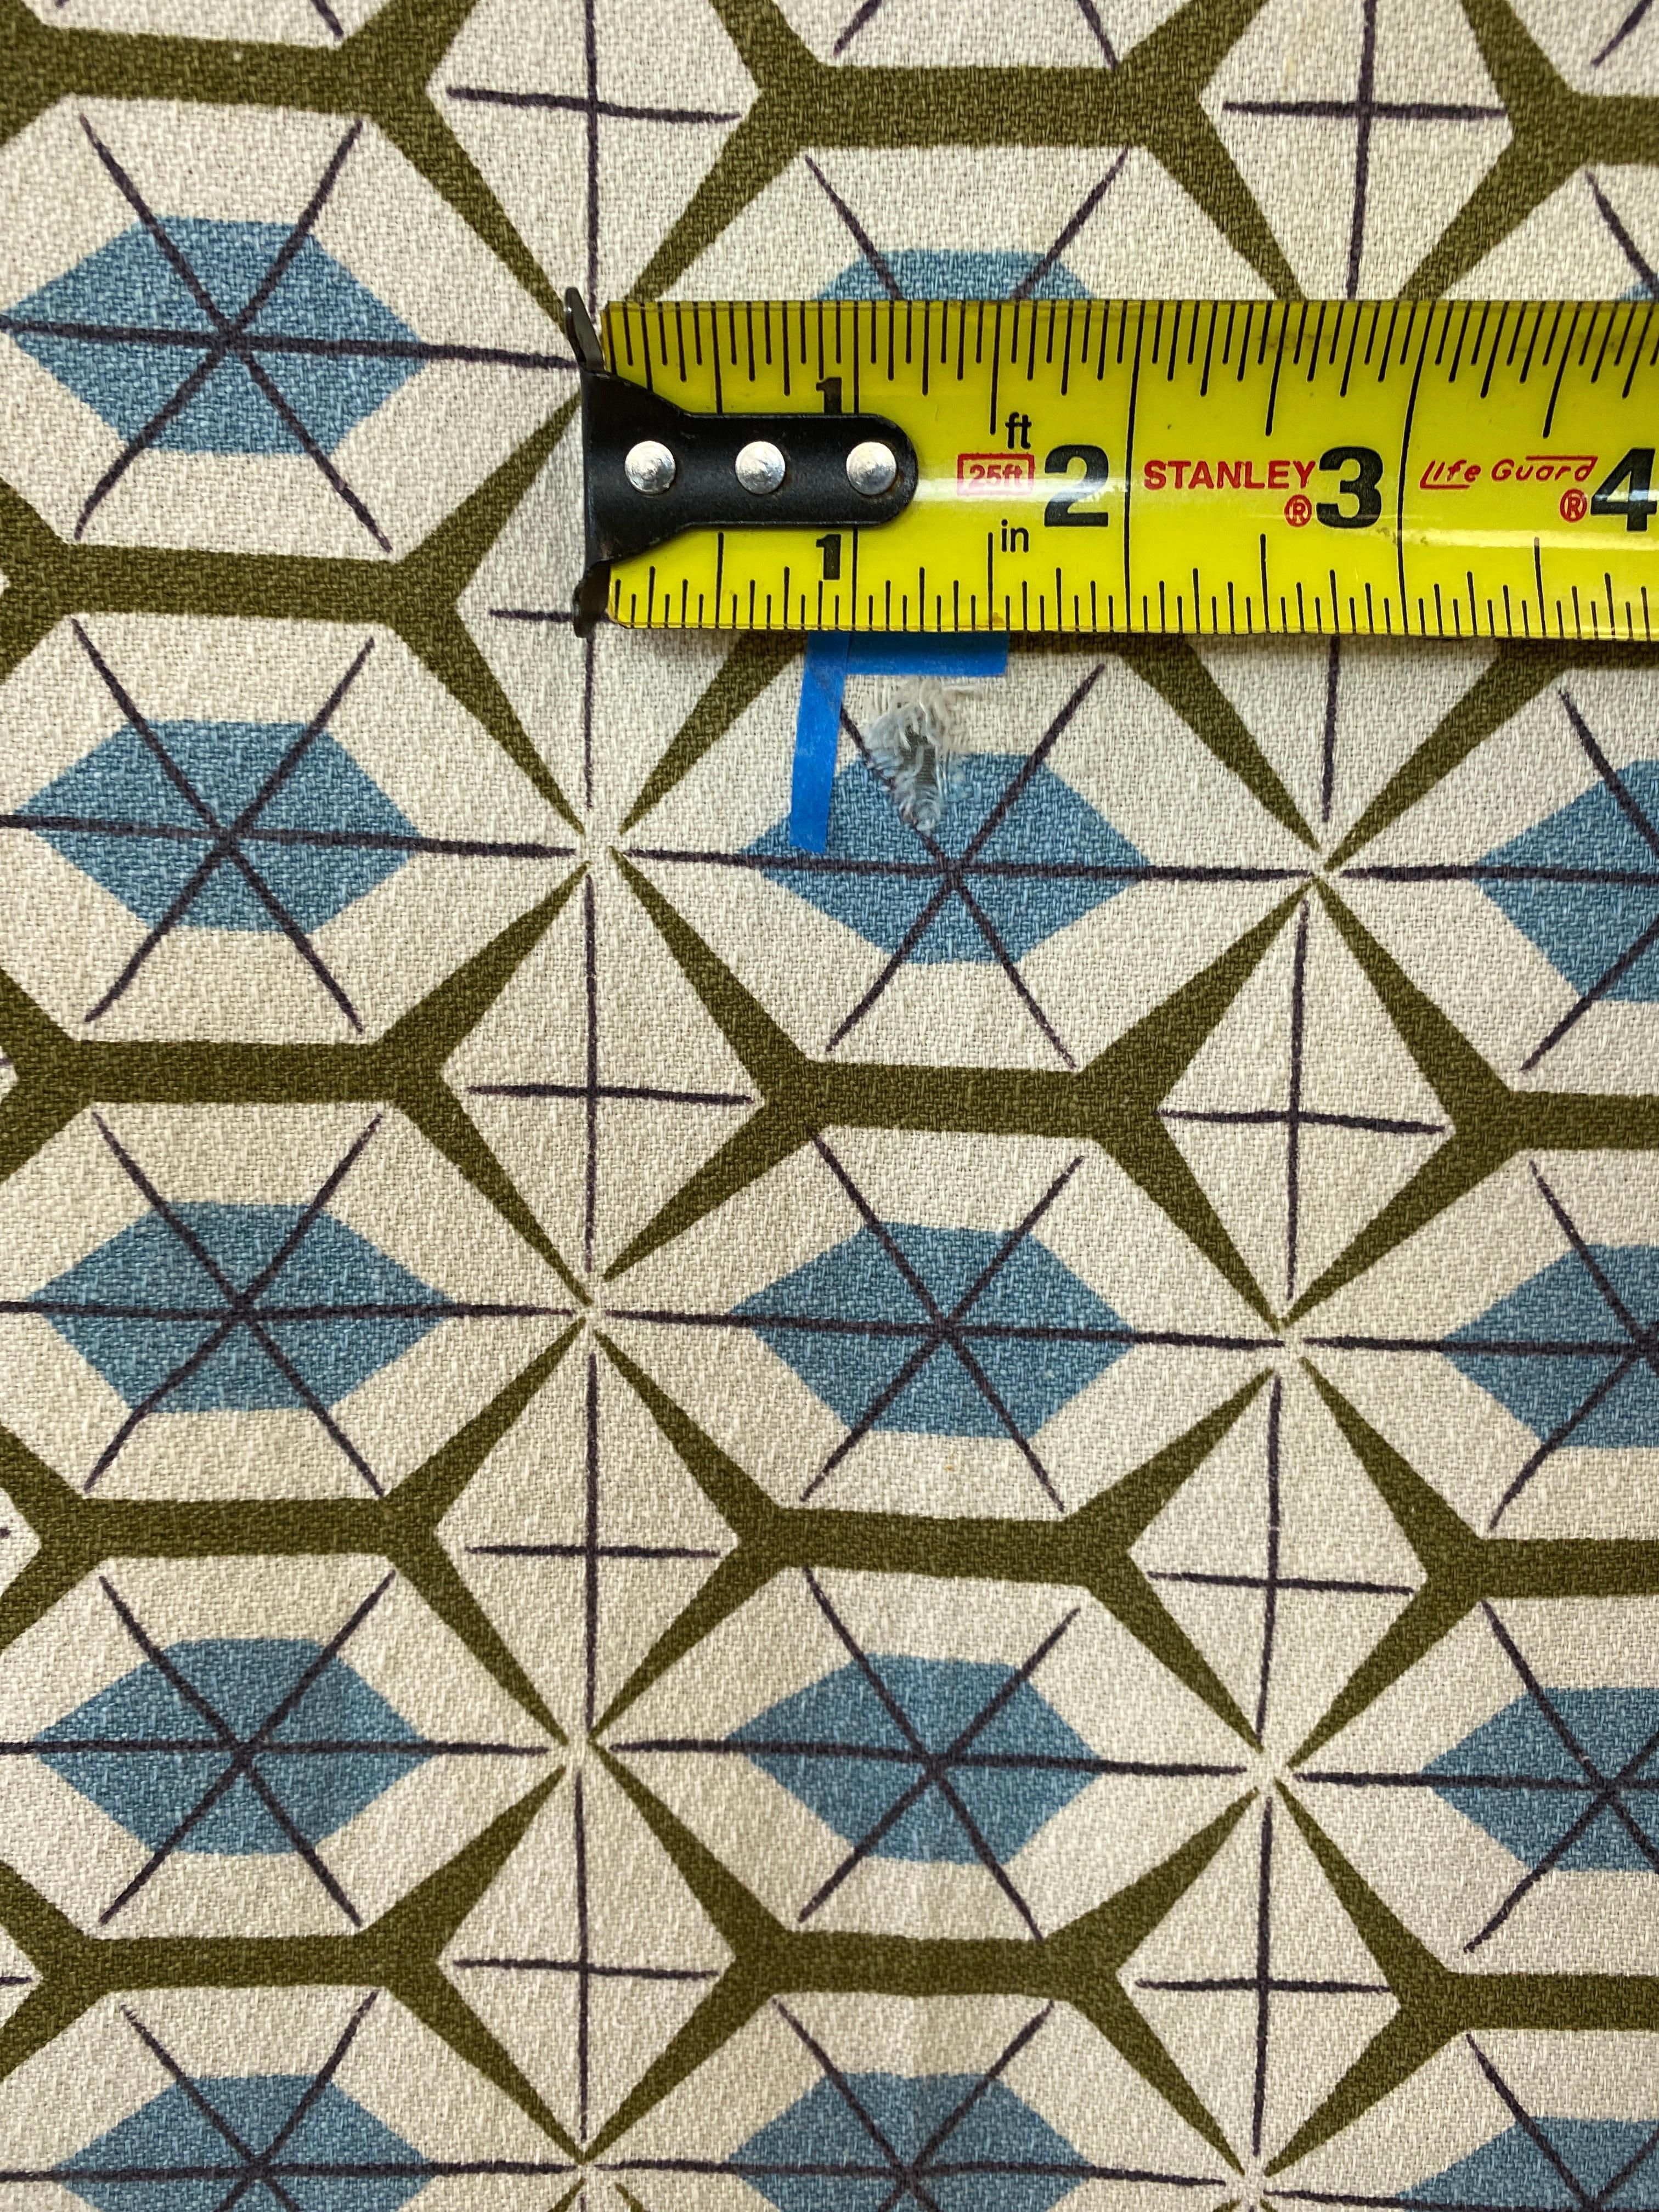 Two Paul McCobb For Riverdale Fabric Panels 